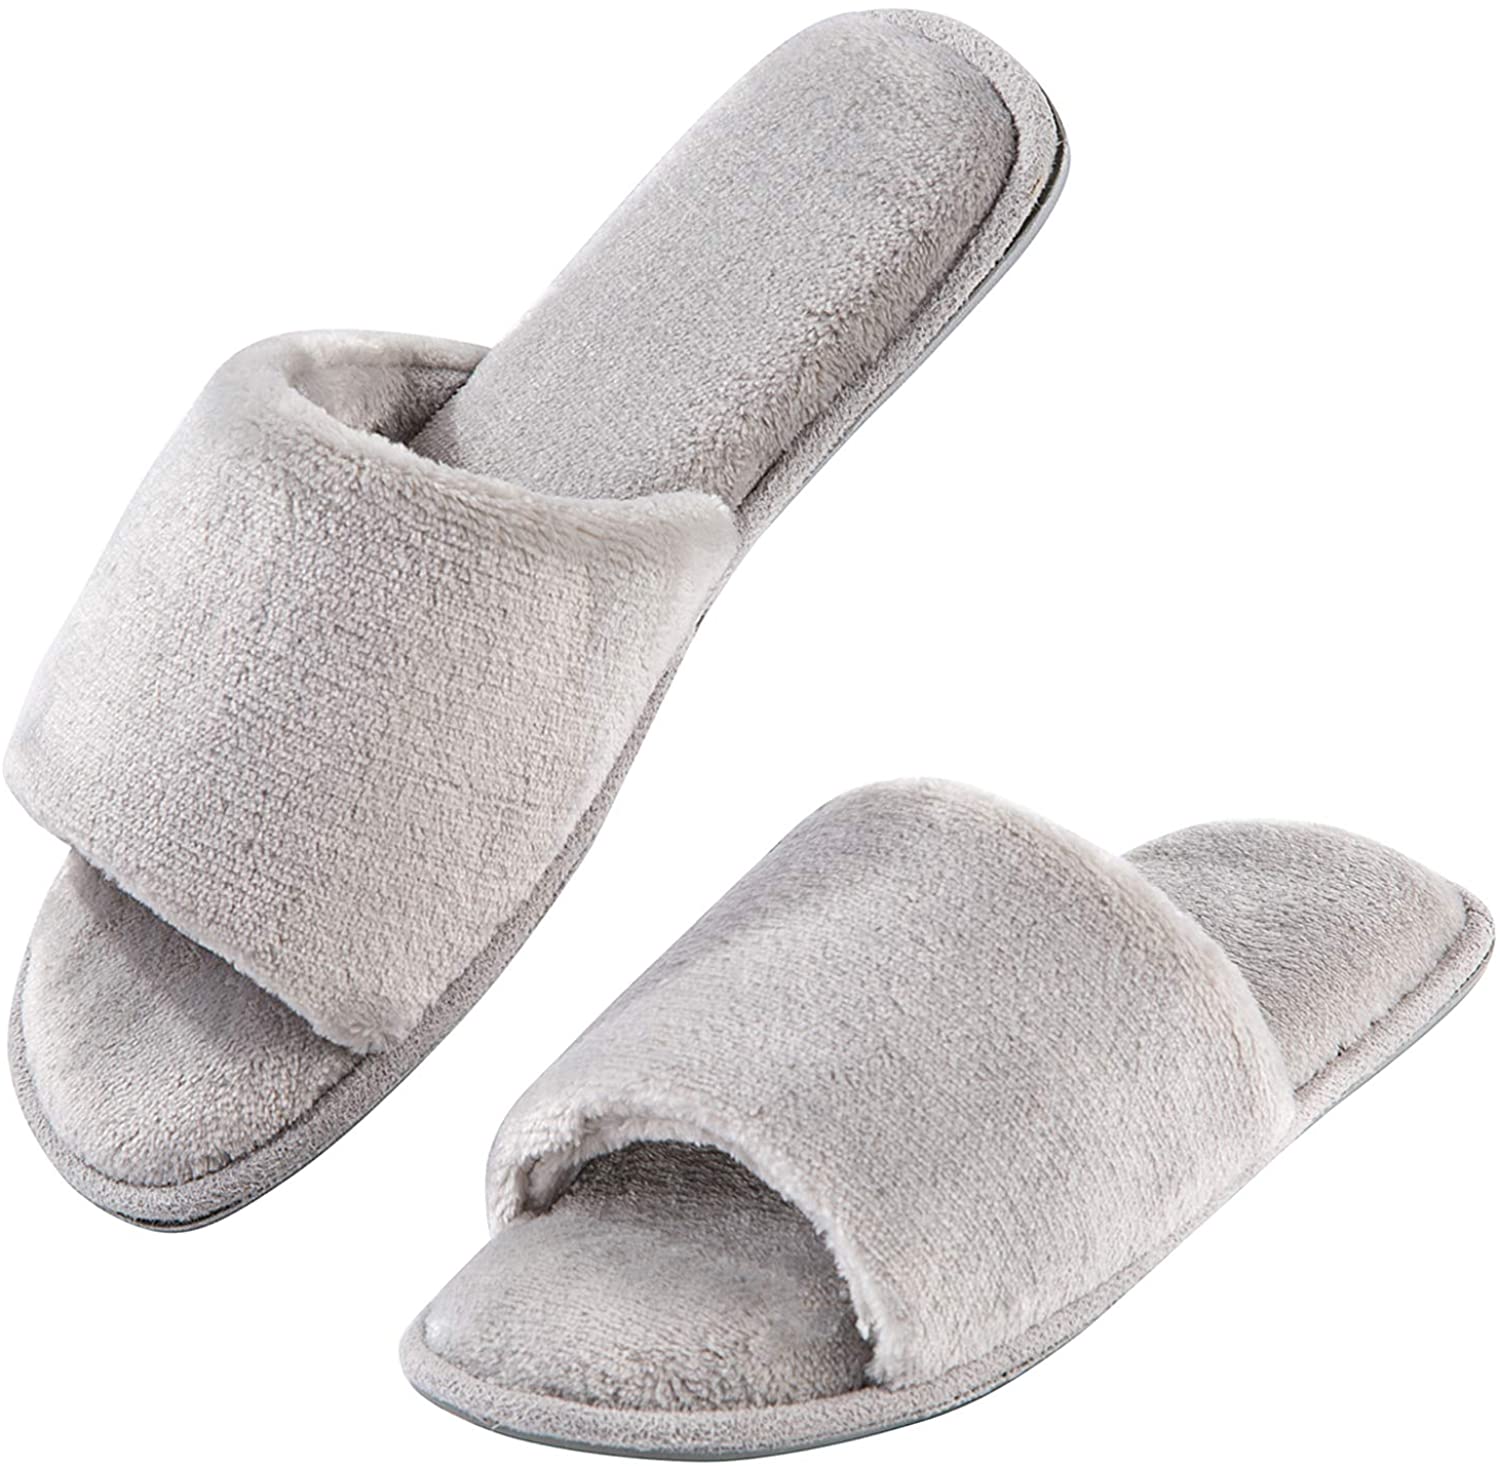 Ladies Memory Foam Slippers Open Toe Comfy Slip On Home Shoes 